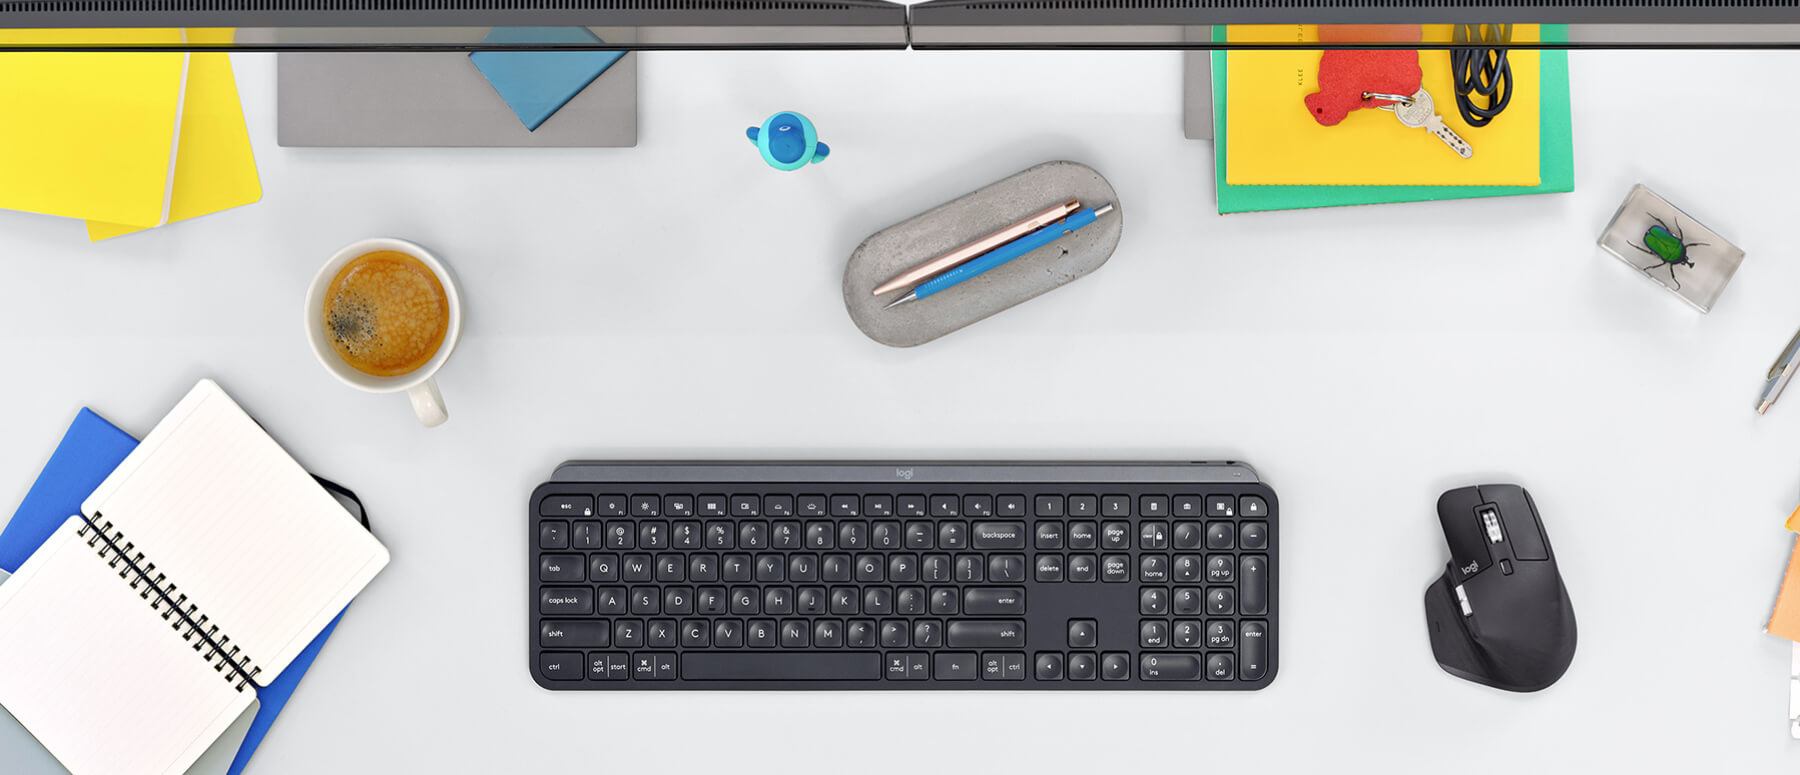 Logitech announces the MX Master 3 and a new compact keyboard